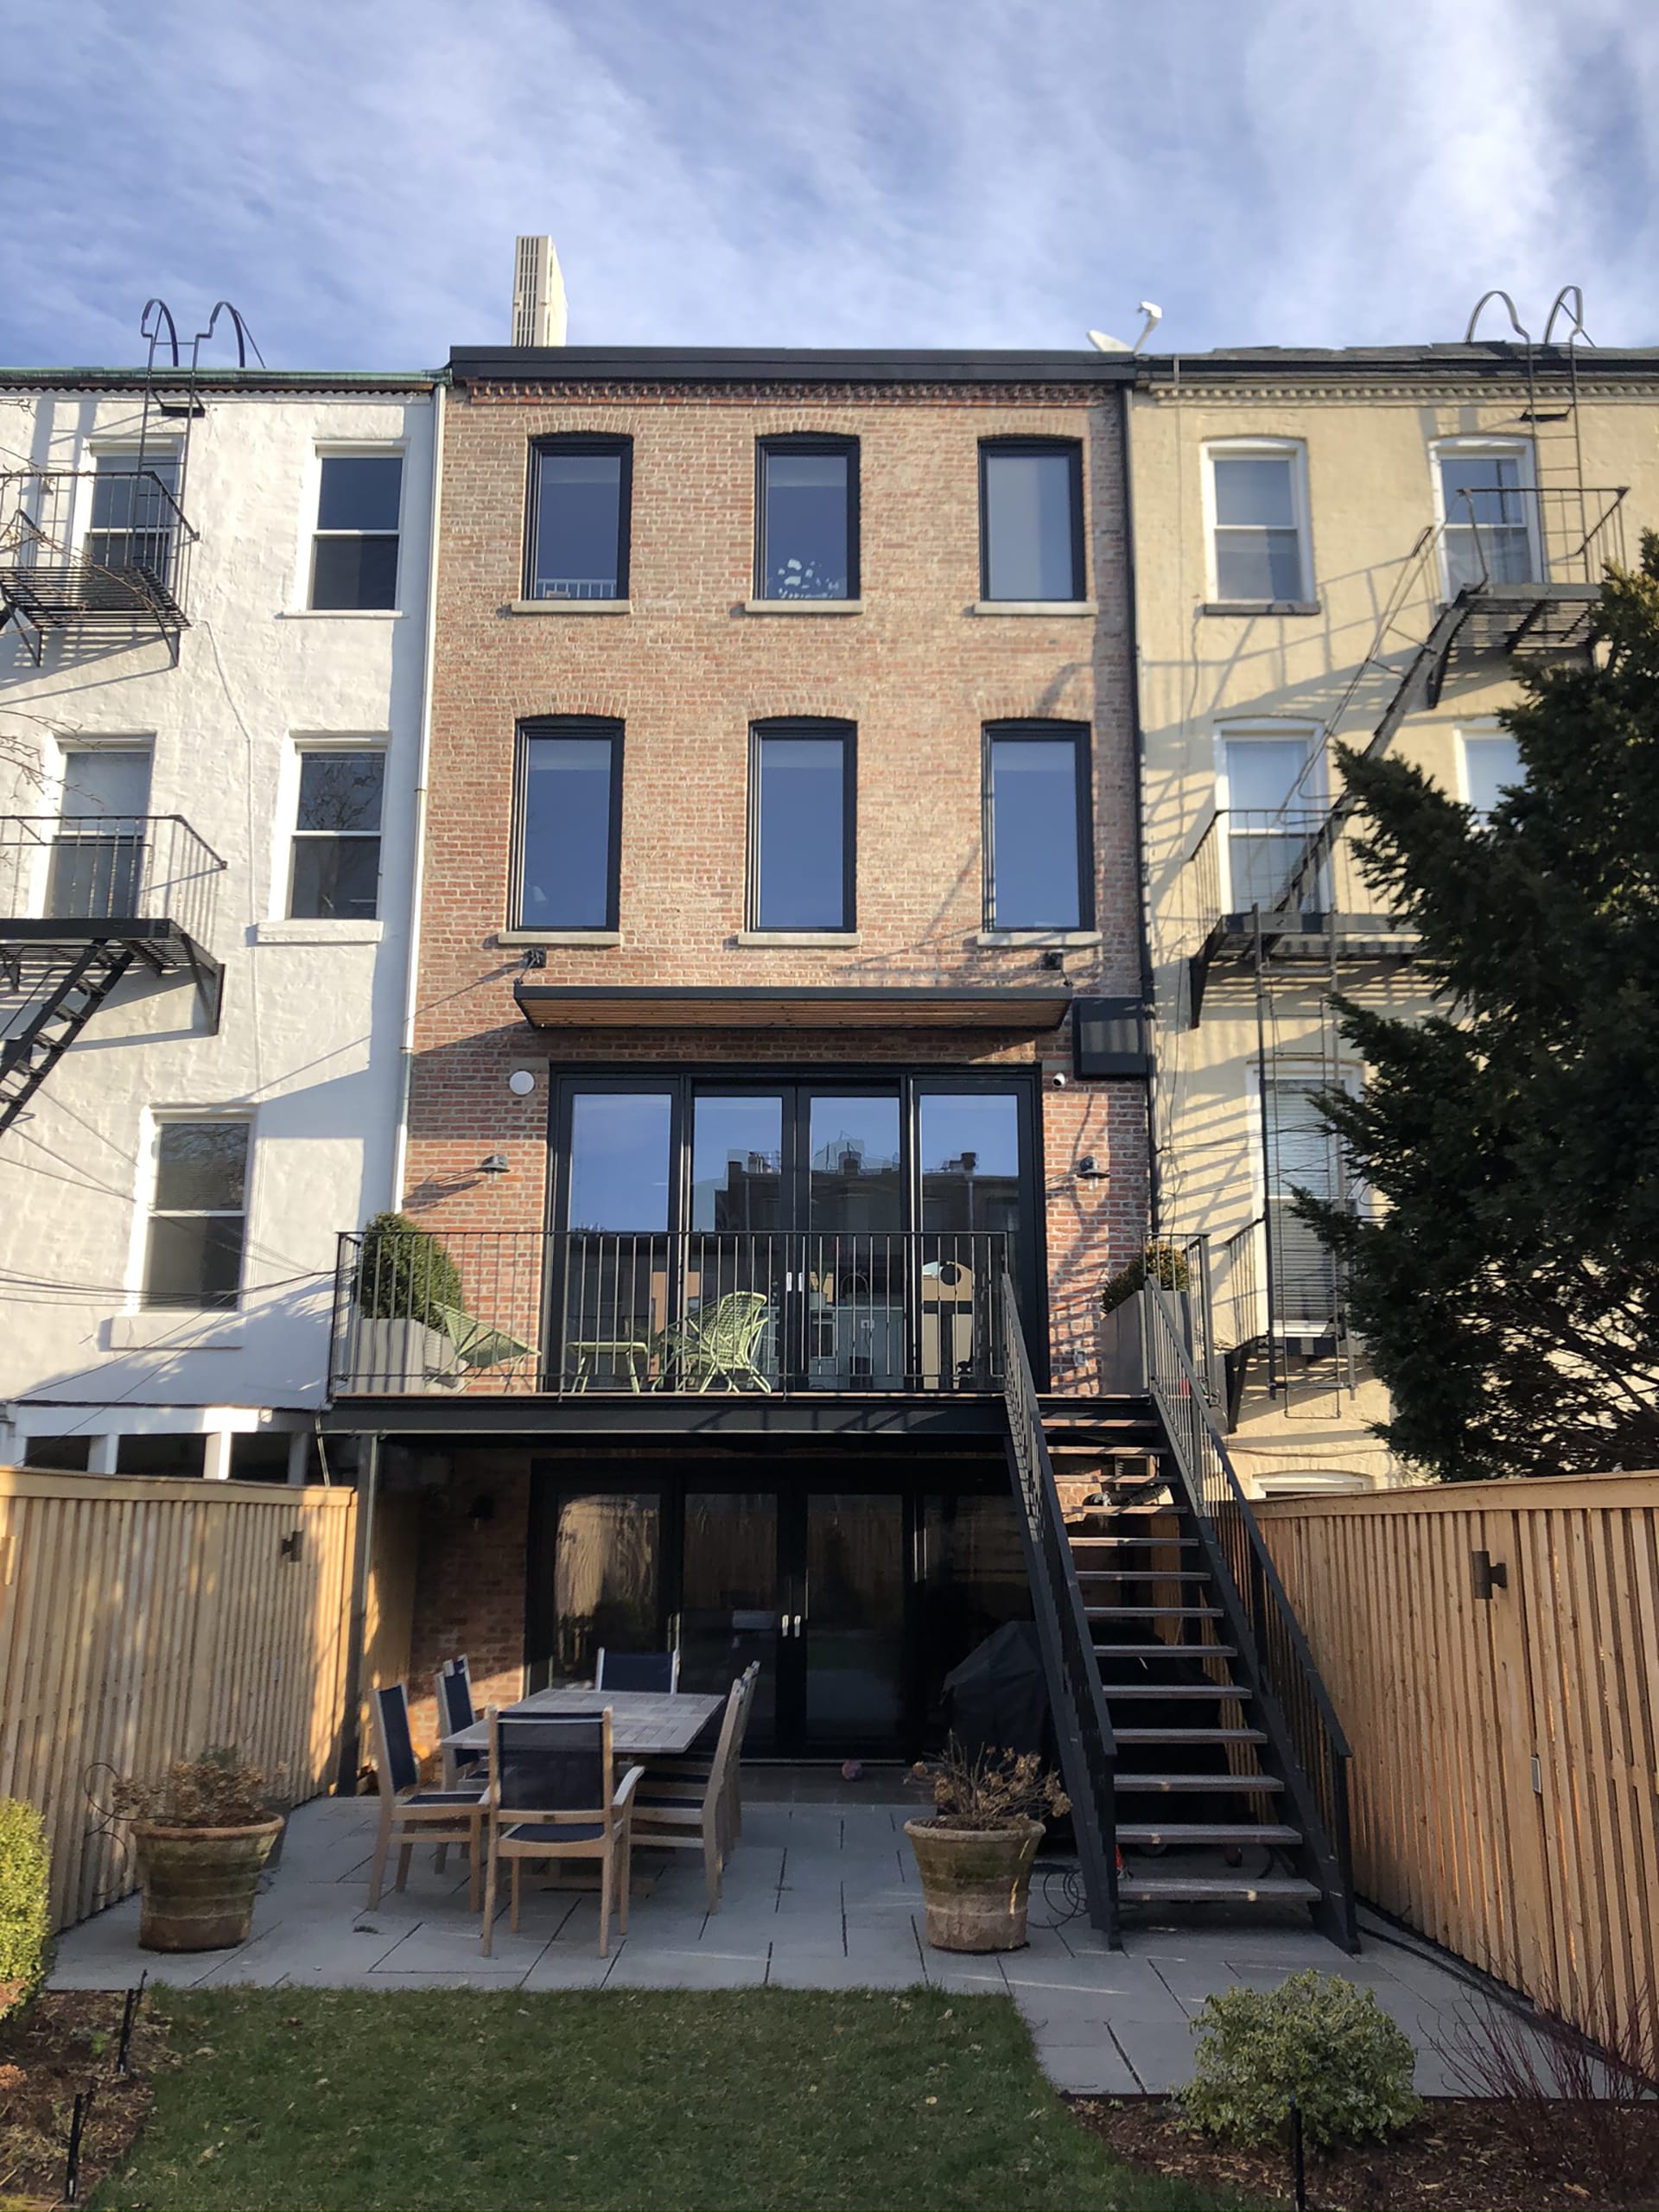 Rear façade of a Carroll Gardens townhouse with a new parlor-level deck, restored brick, and new larger windows and doors